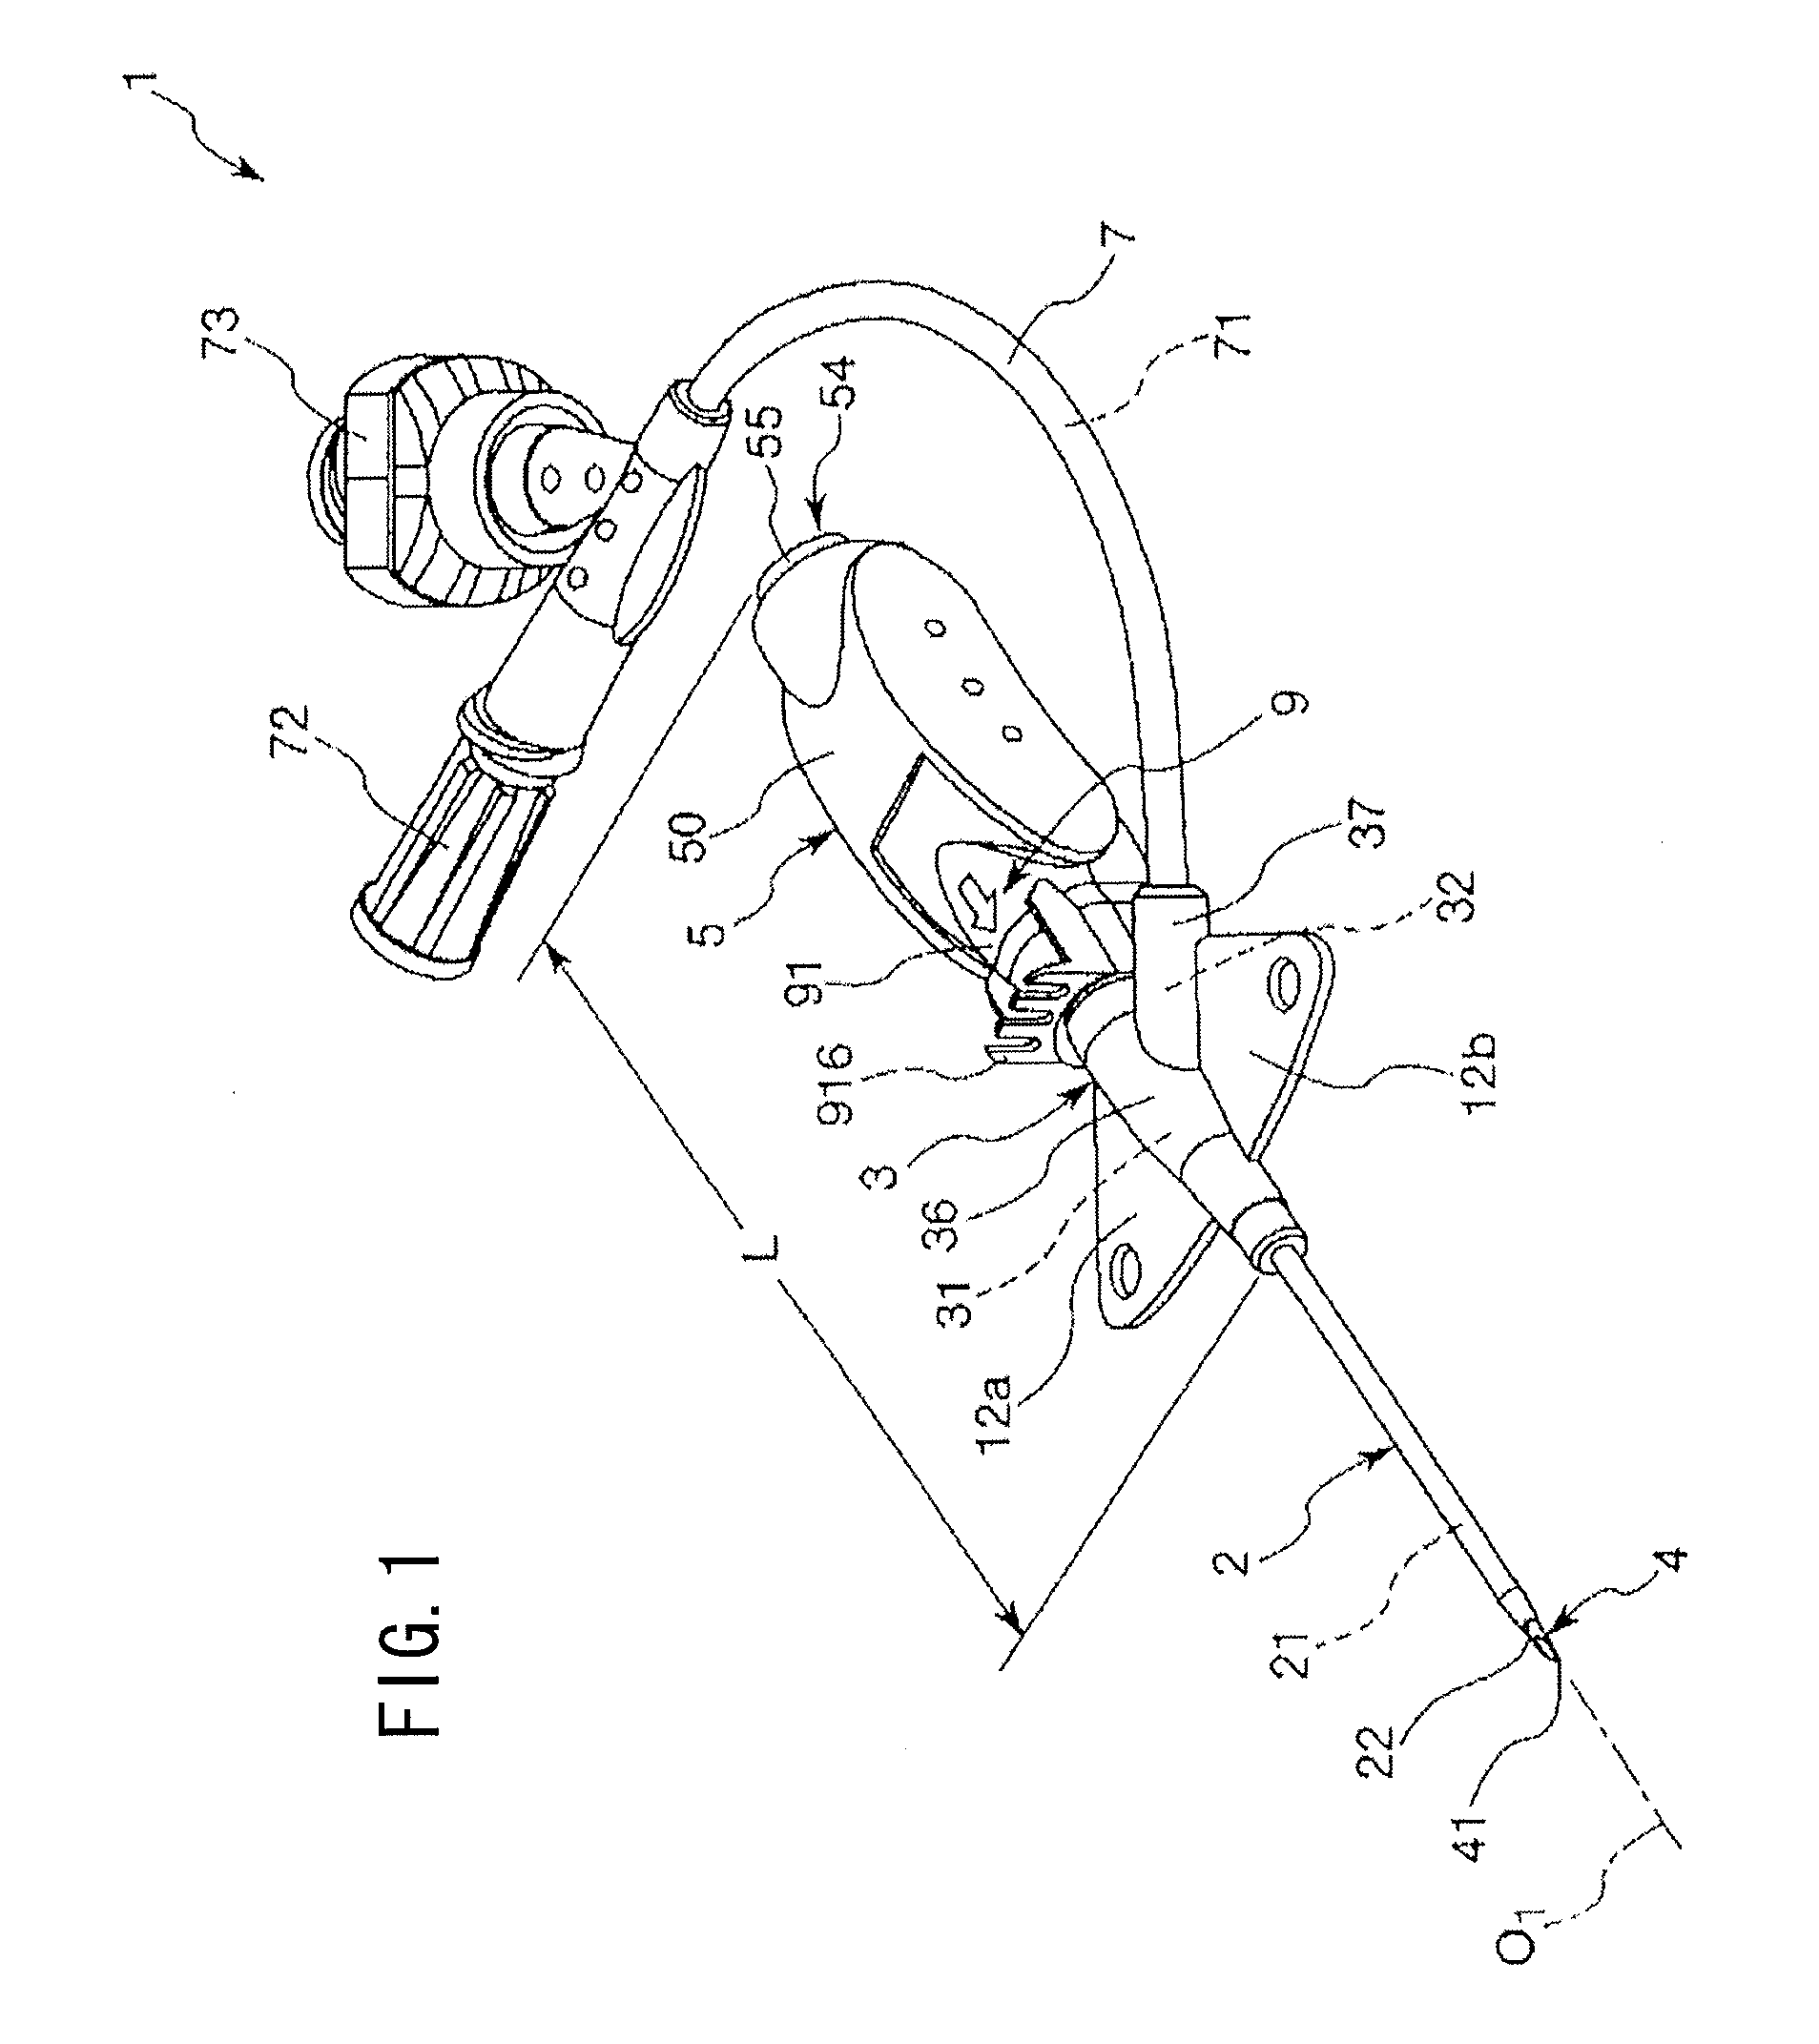 Indwelling needle assembly and method of using the same